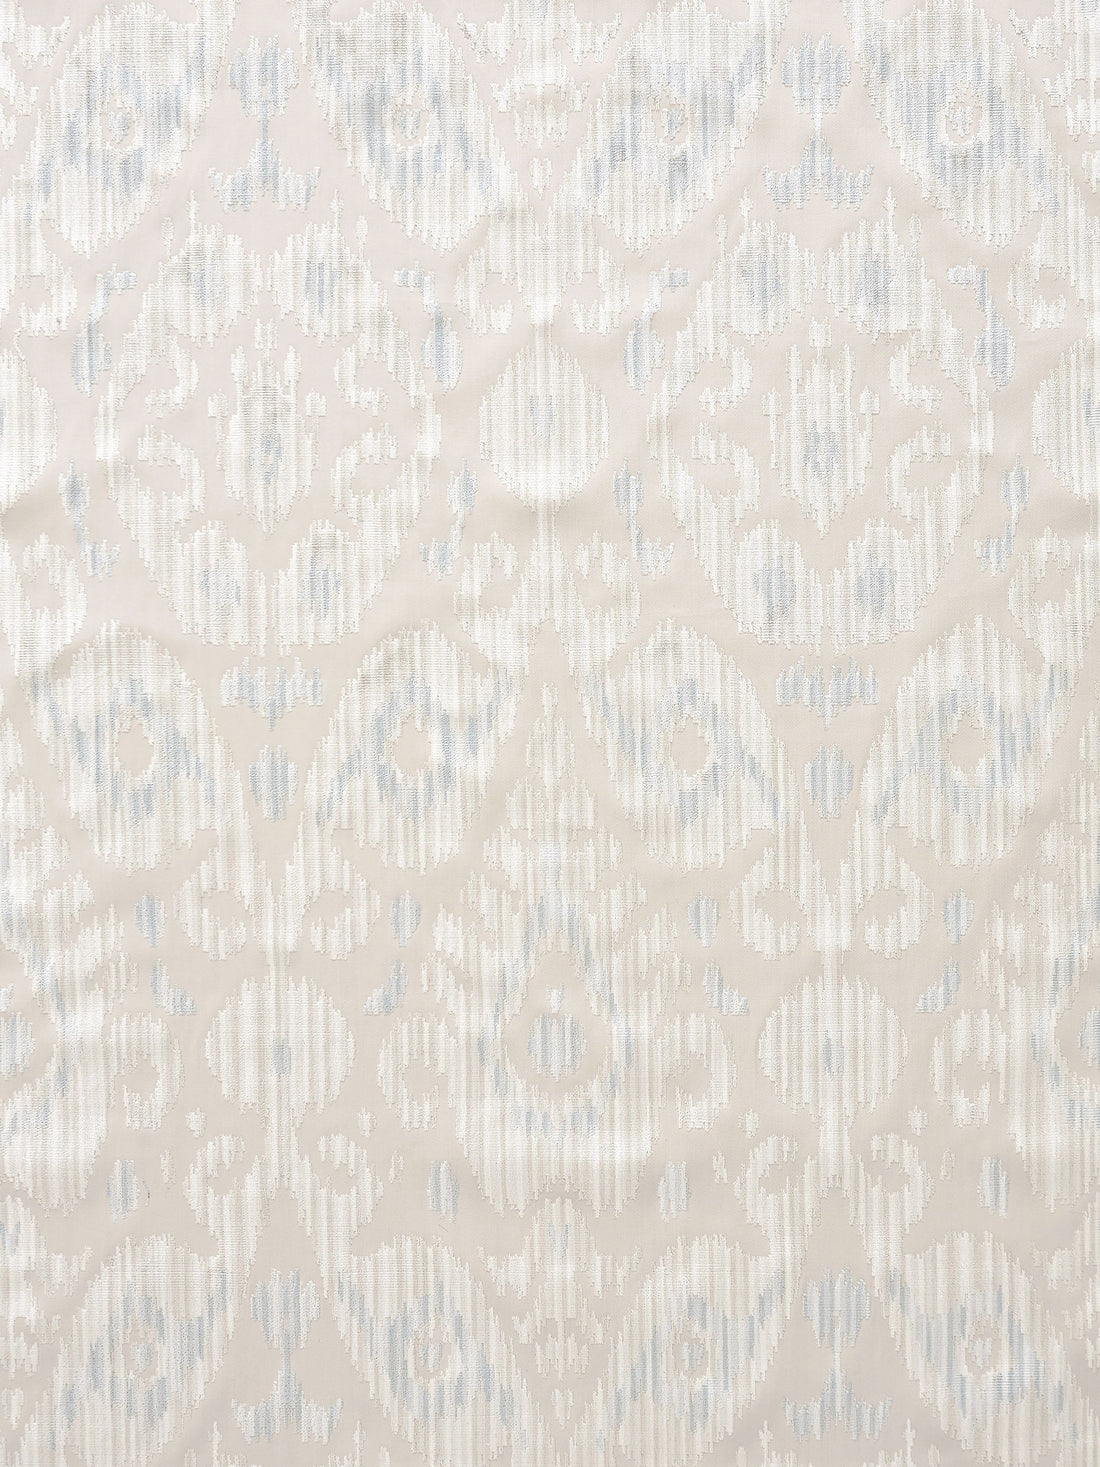 Tashkent Velvet fabric in cloud color - pattern number SC 000127015 - by Scalamandre in the Scalamandre Fabrics Book 1 collection